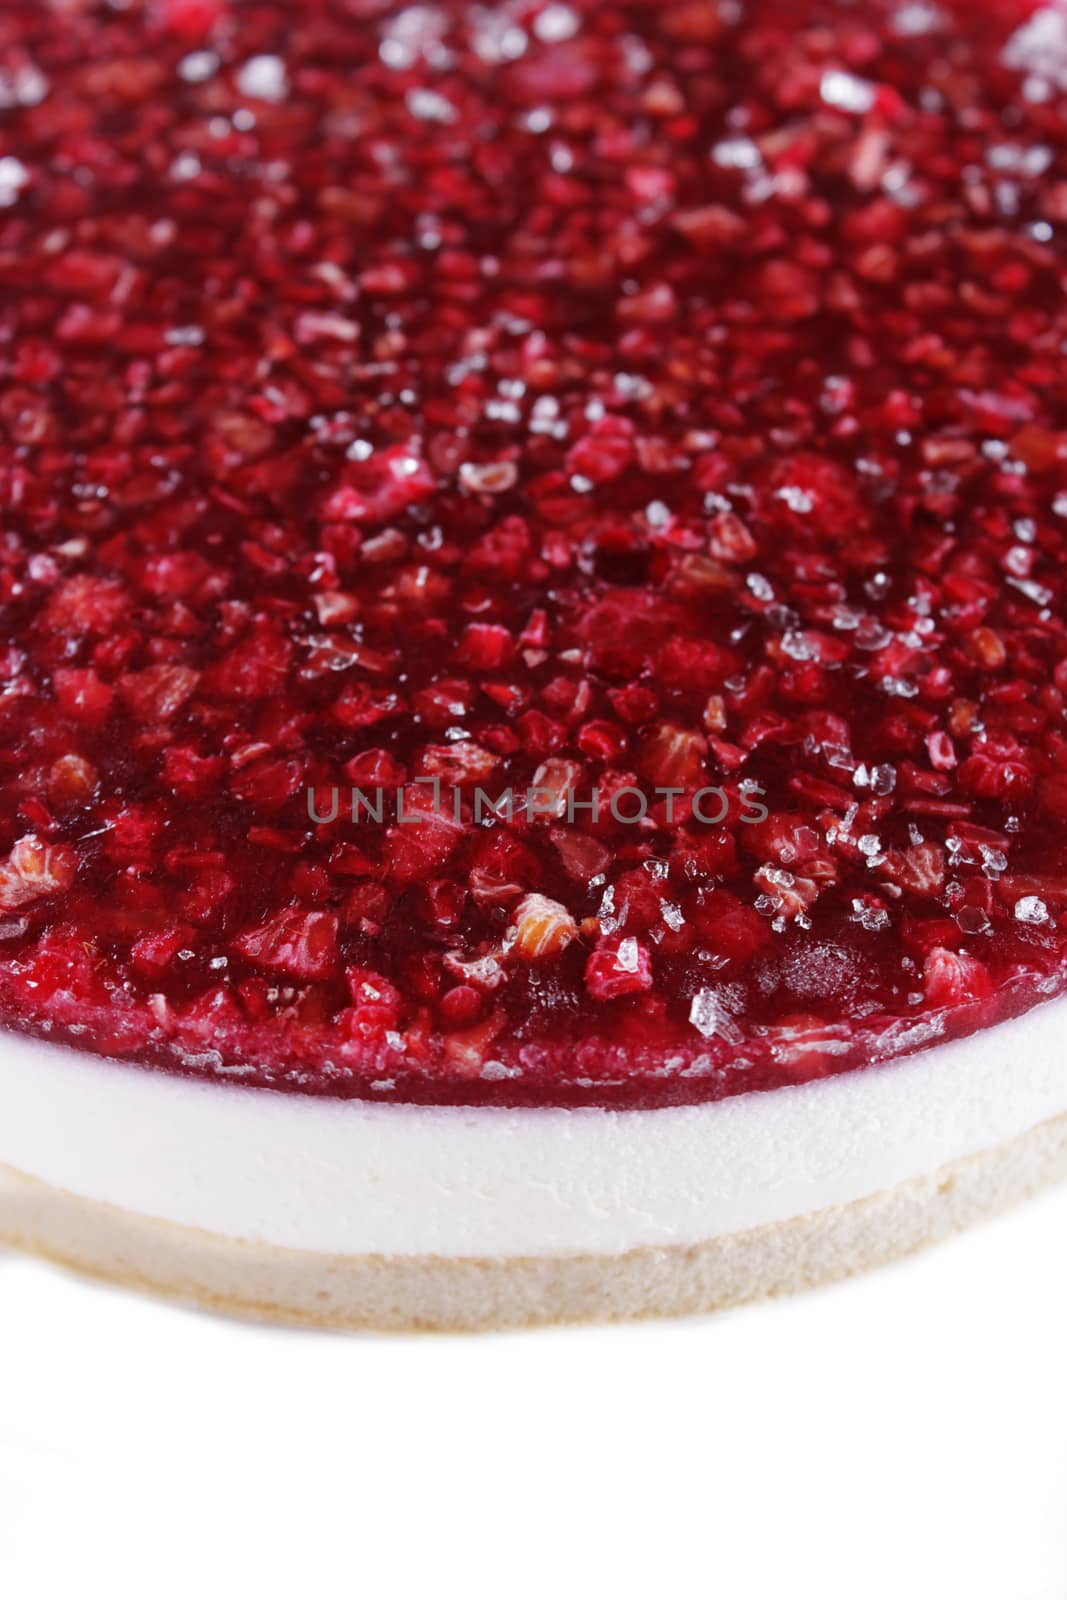 Part of cheesecake with raspberry on a plate by Angel_a